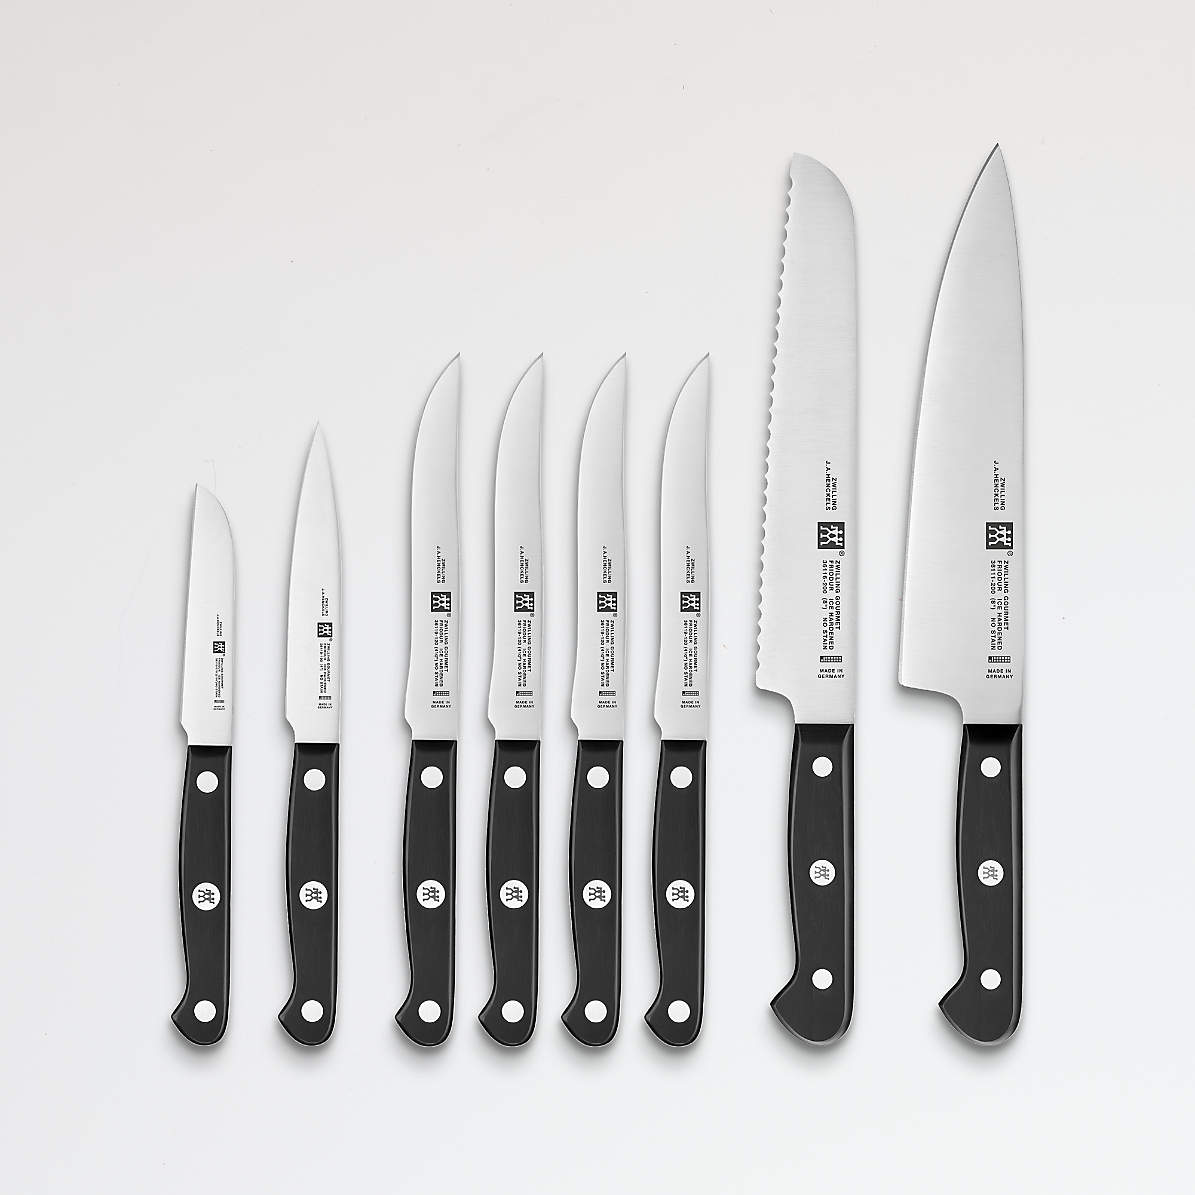 Cook N Home 9-Piece Ceramic Knife Set with Sheaths, Multicolor